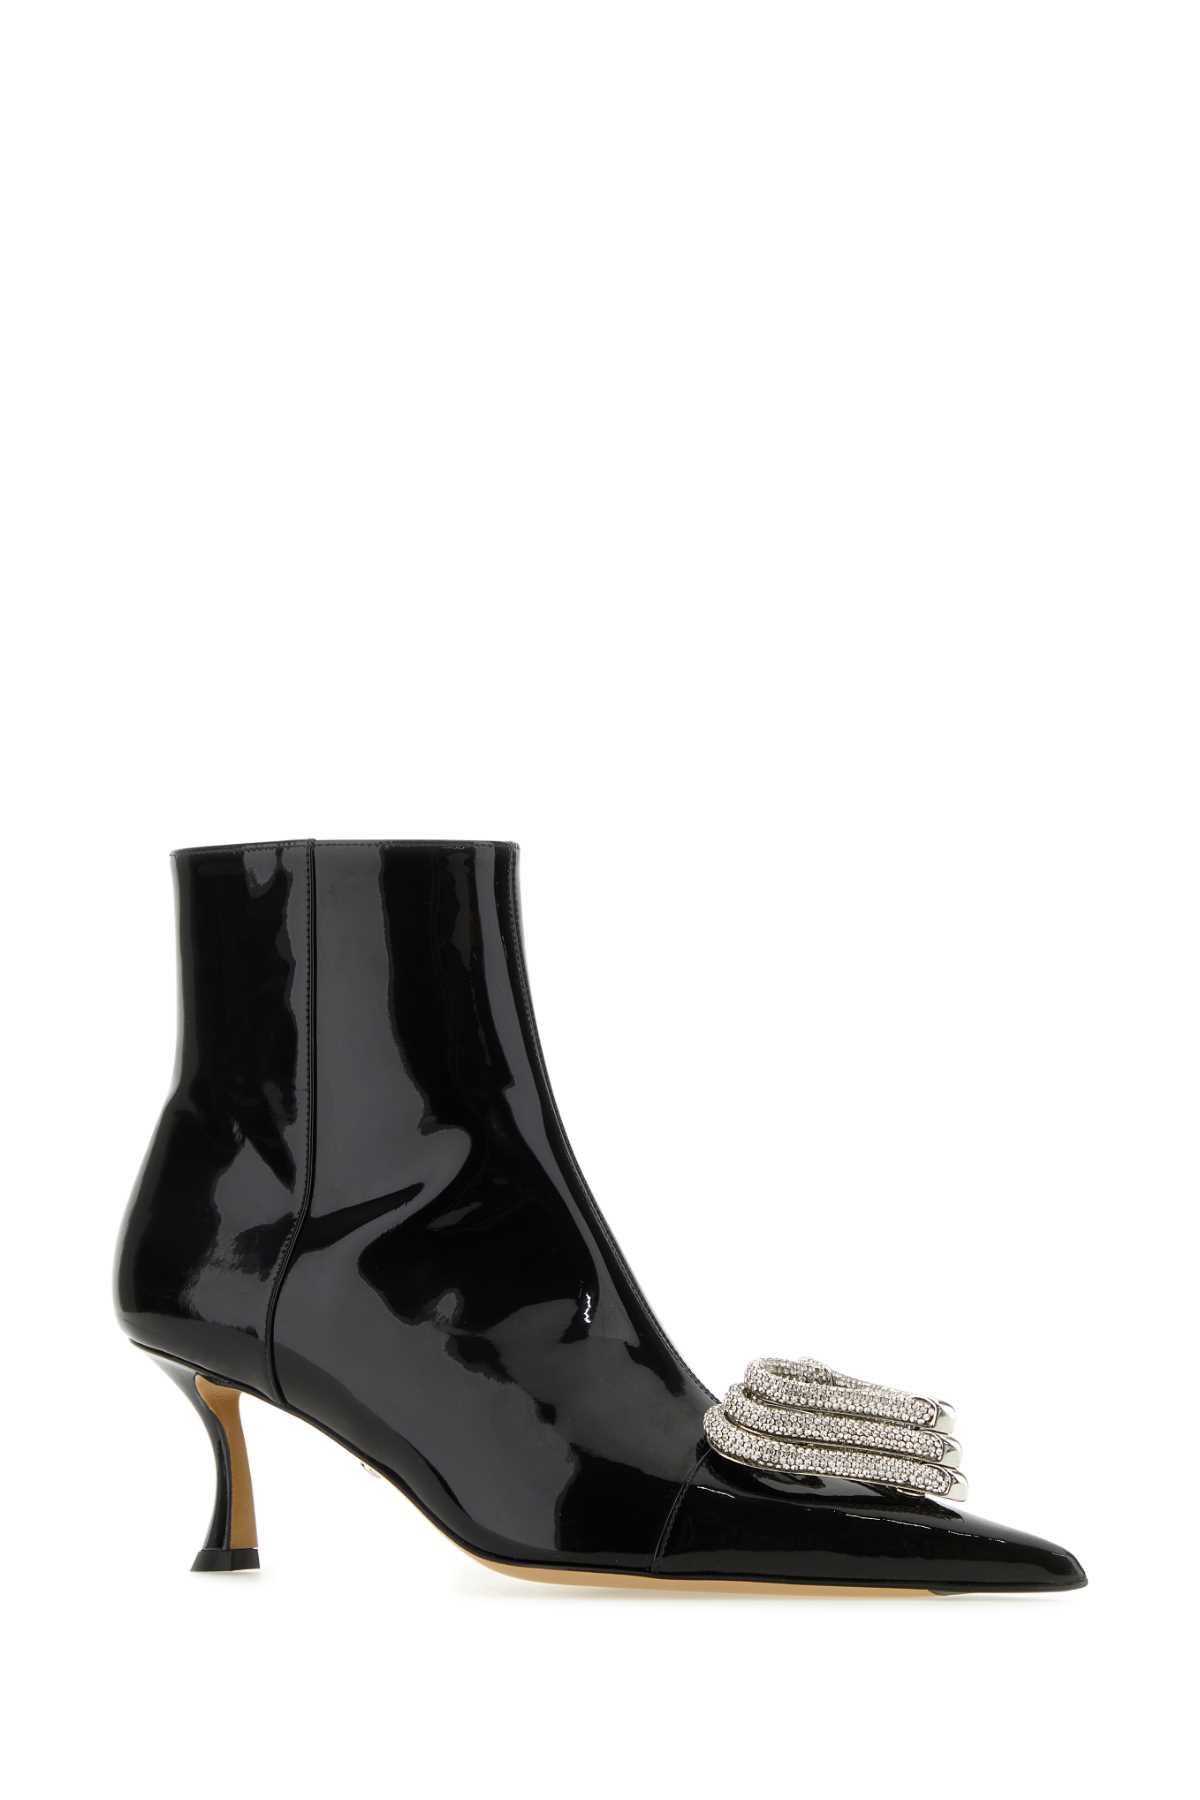 Mach &amp; Mach Black Leather Ankle Boots